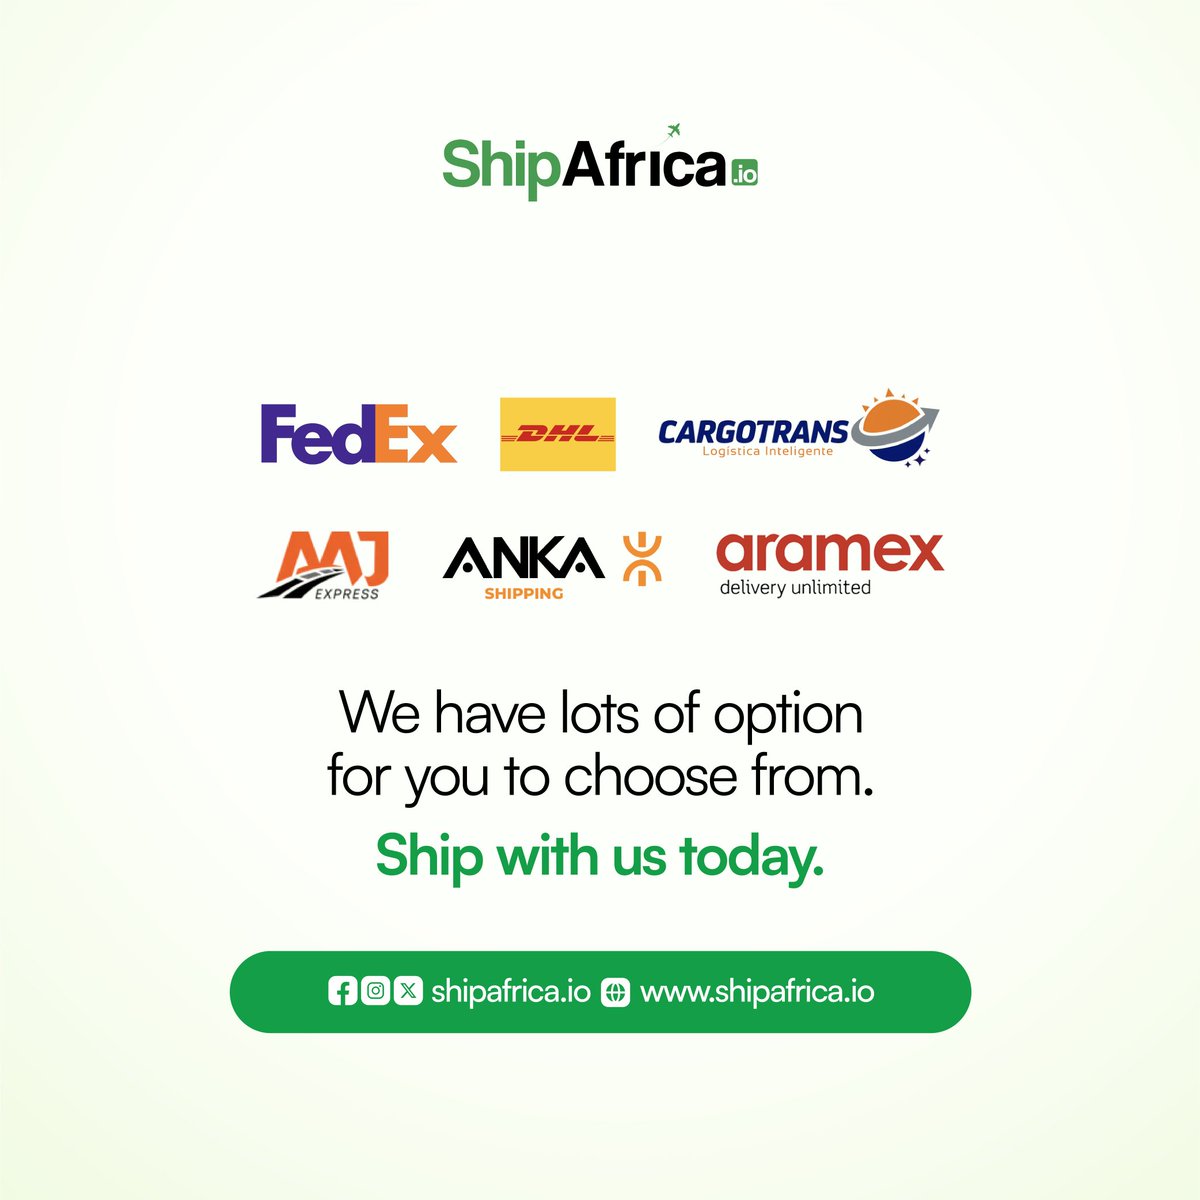 With our flexible rates and different courier options to choose from, you shouldn’t give in to shipping cost when you can ship with us.

Joining us newly? Enjoy 5% cashback on all international shipments until JUNE 3RD

Visit shipafrica.io to sign up.
#shipping #sme